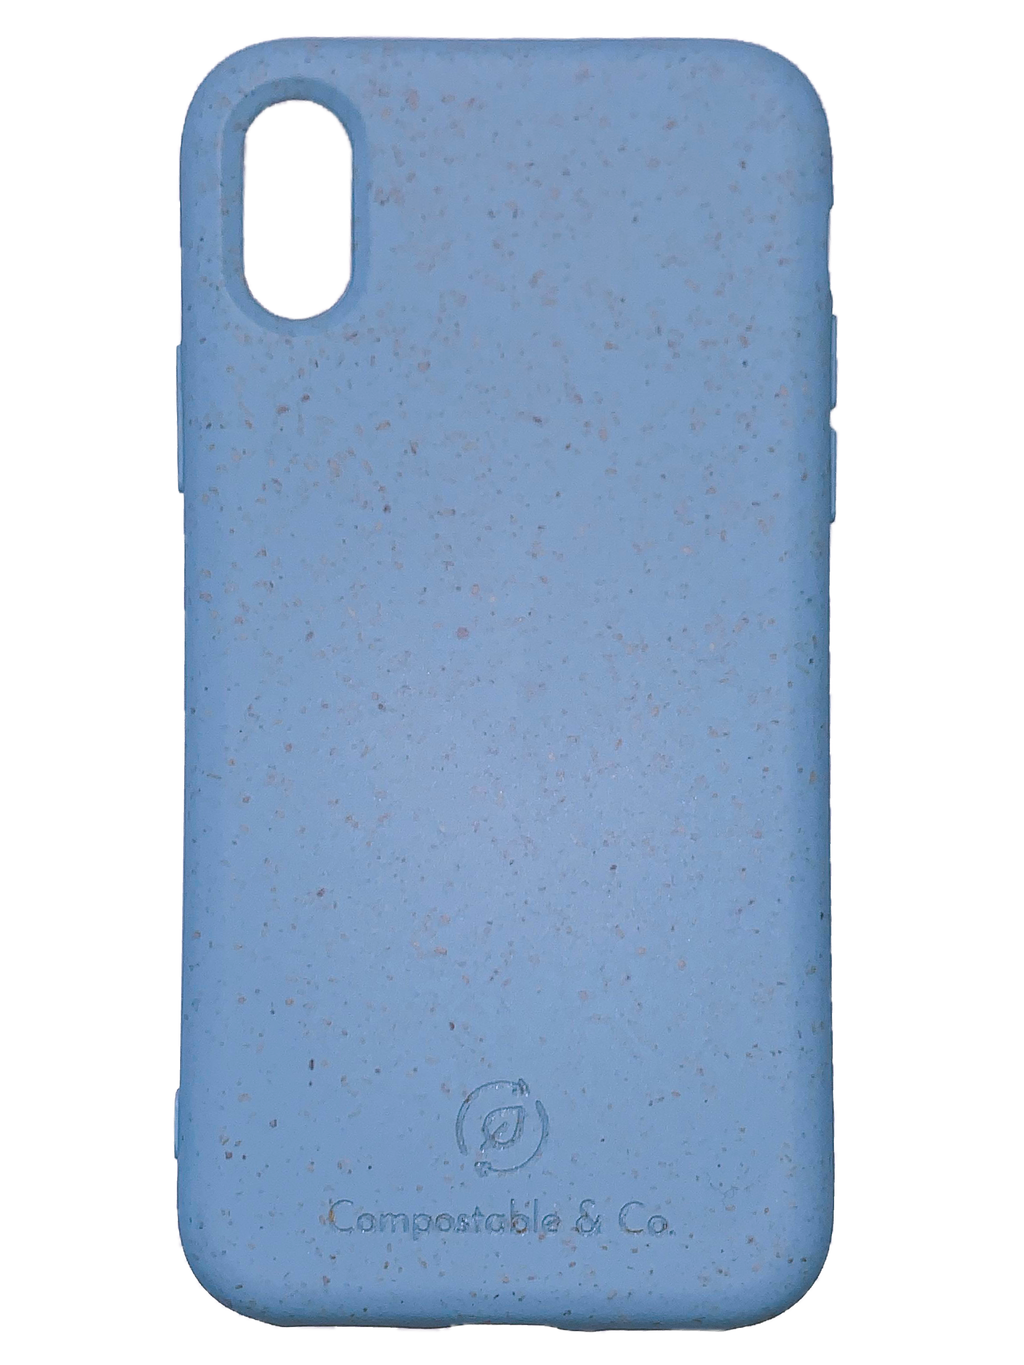 Compostable & Co. iPhone x / xs max blue biodegradable phone case